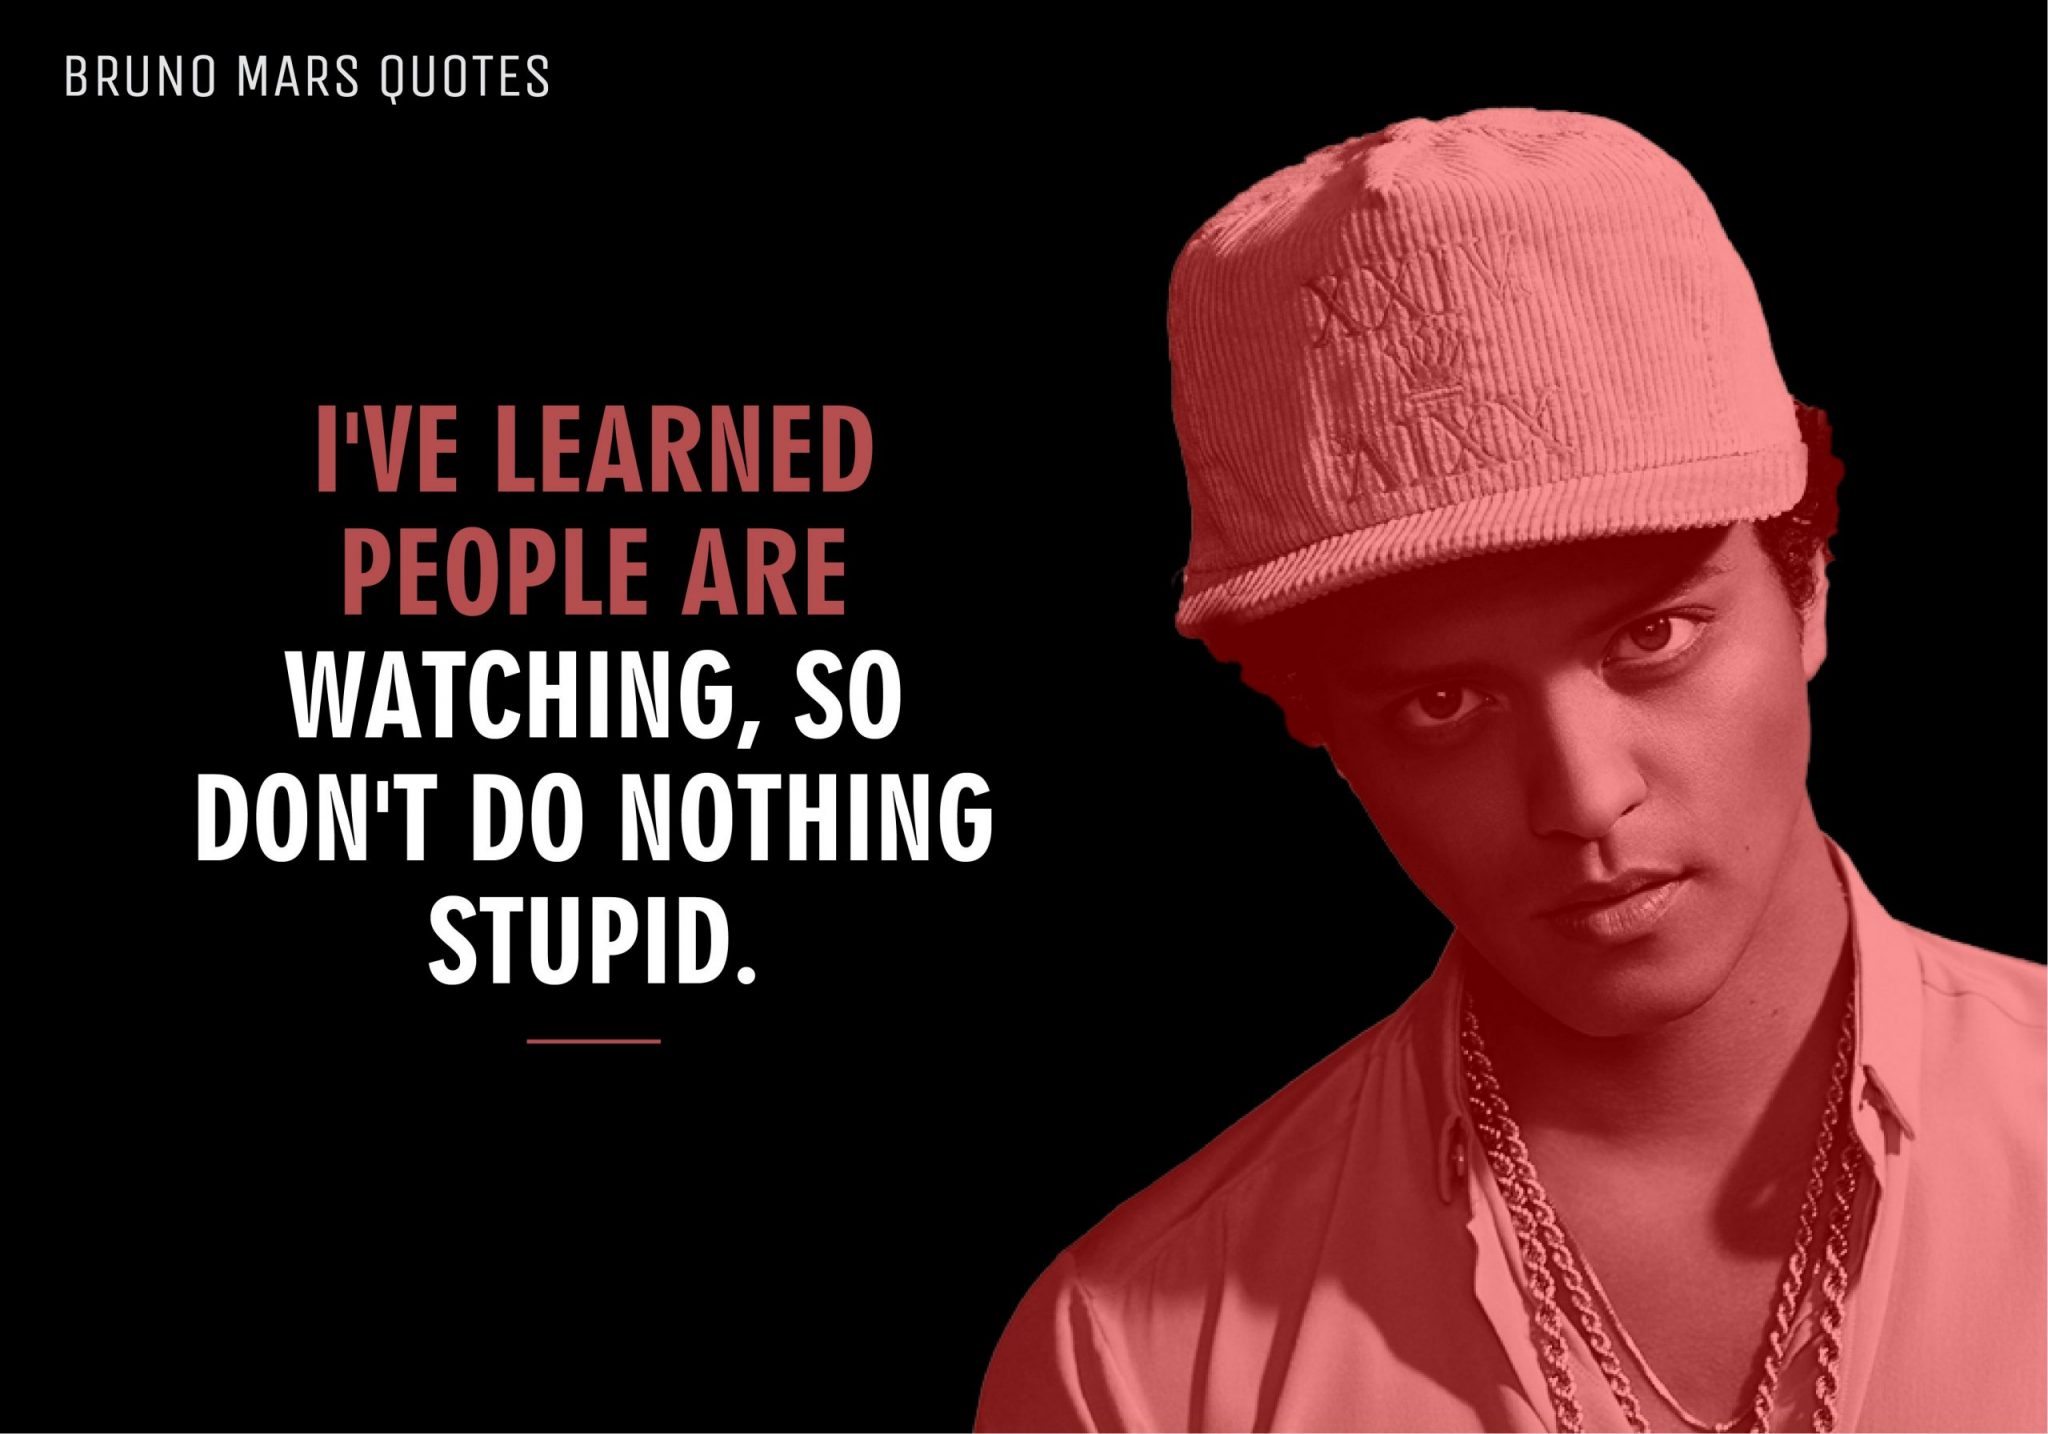 bruno mars quotes from songs